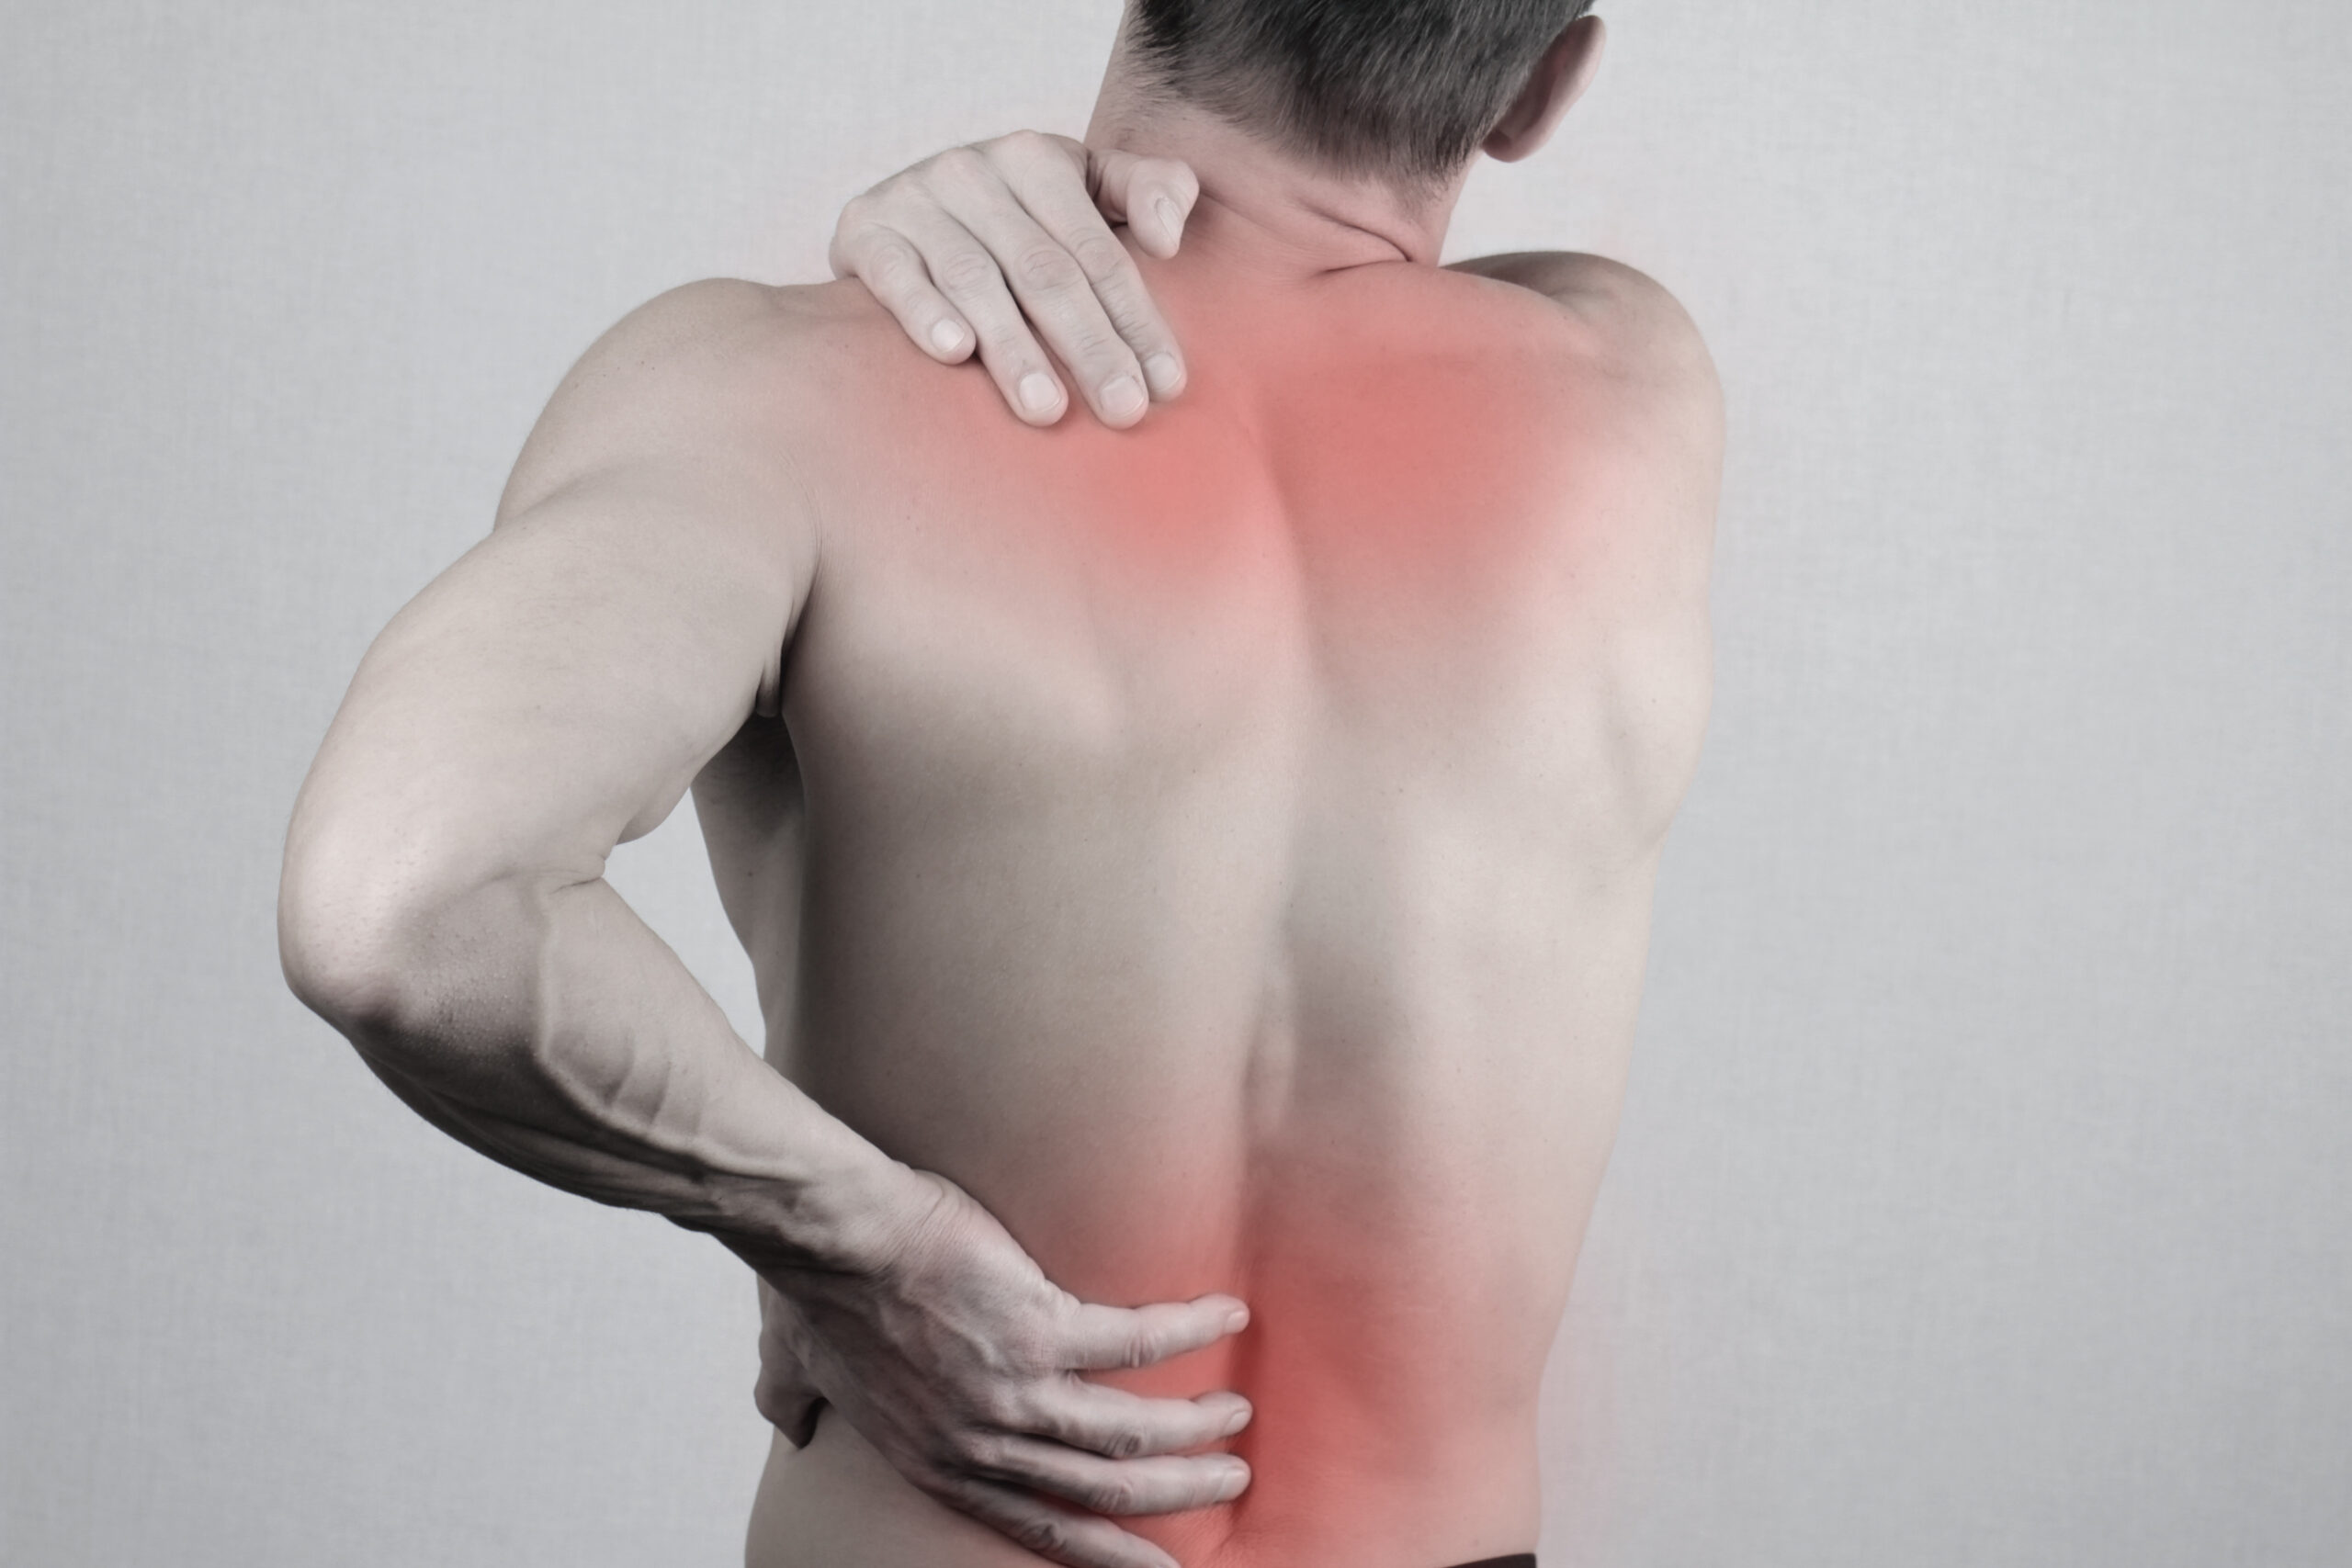 Millions Get Wrong Treatment for Back Pain: Study